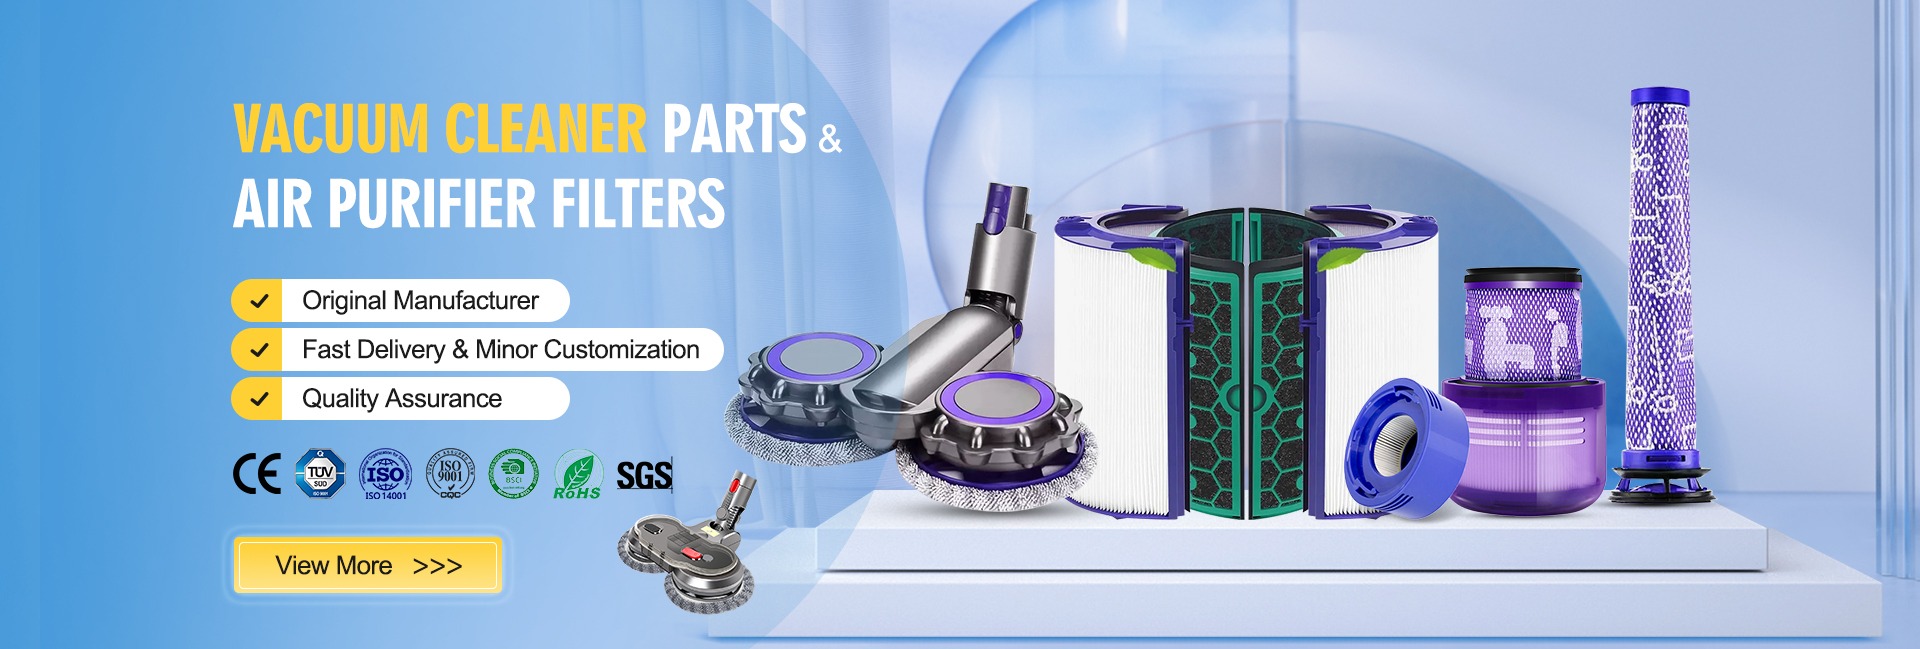 Vacuum Cleaner Parts & Air Purifier Filters